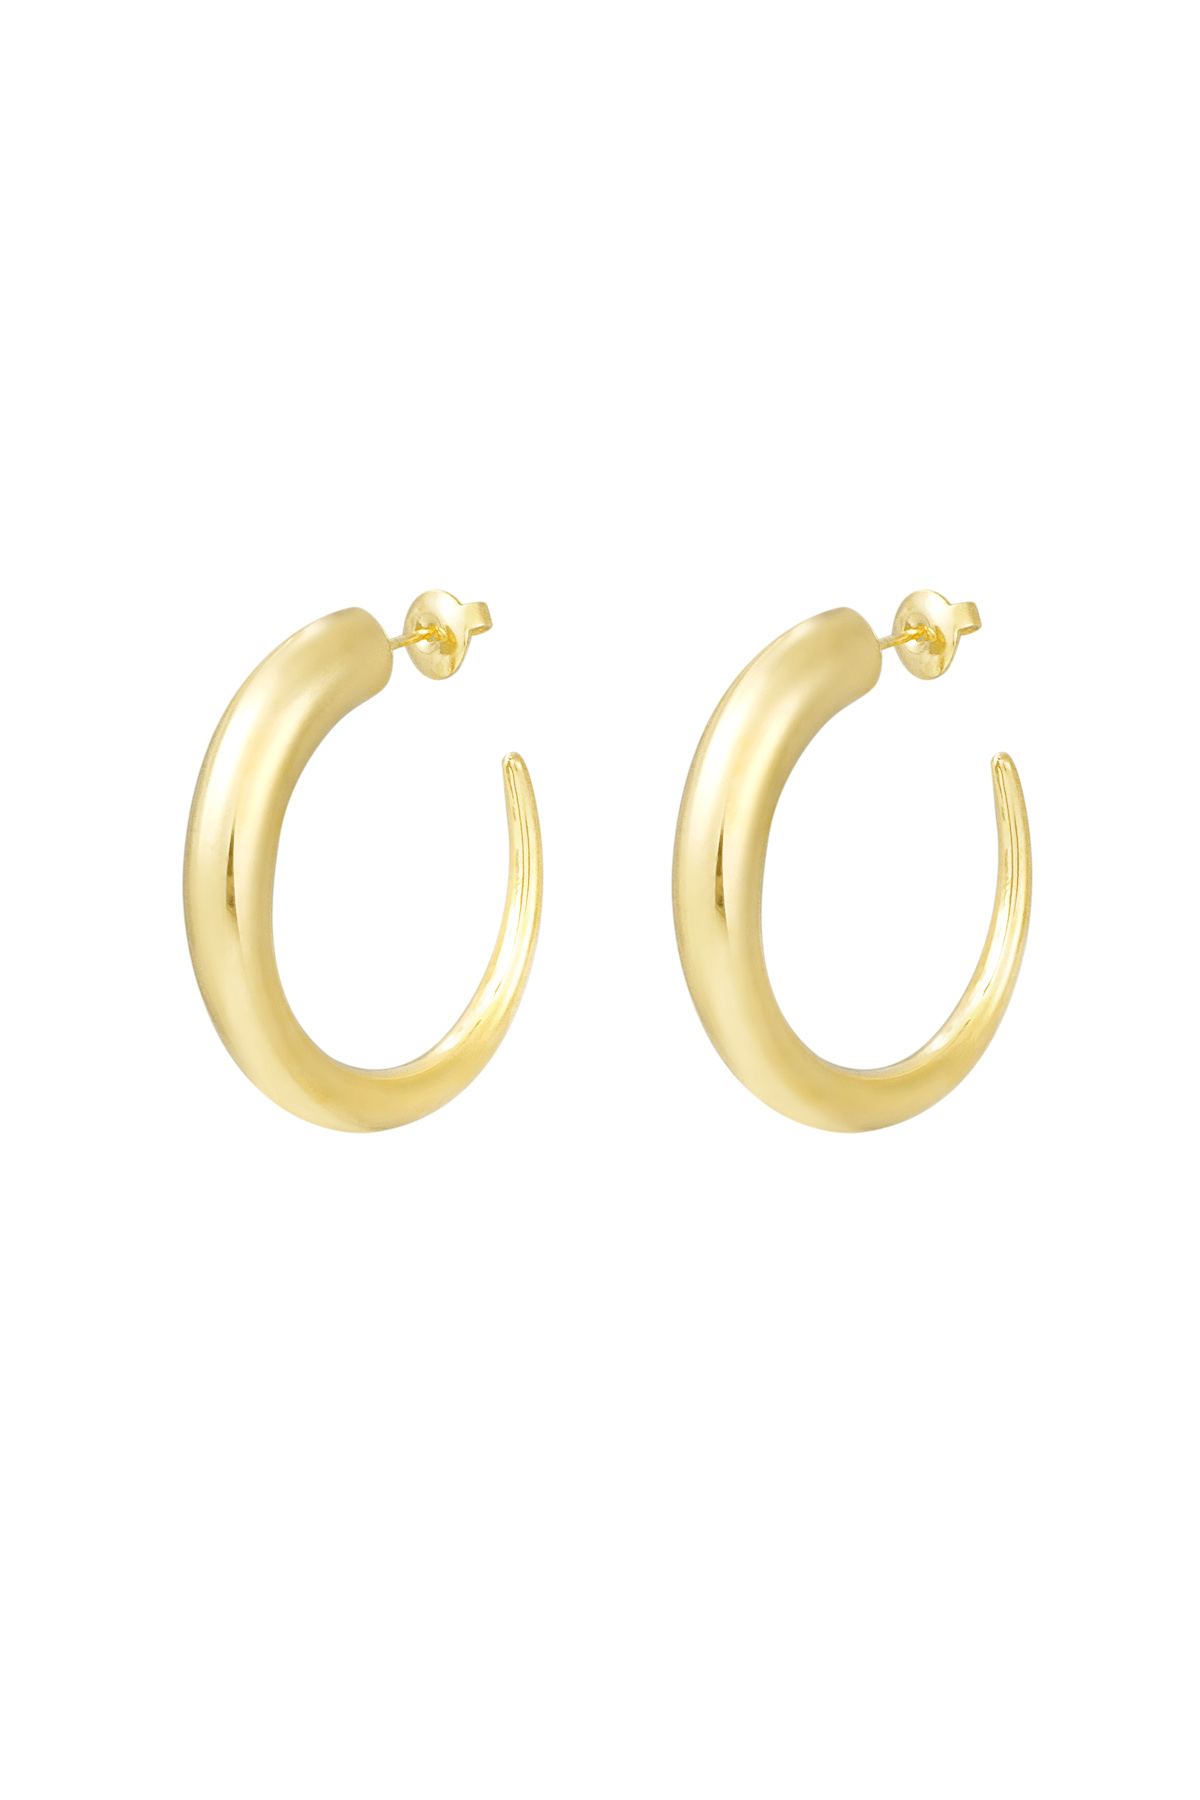 Earrings round - gold 